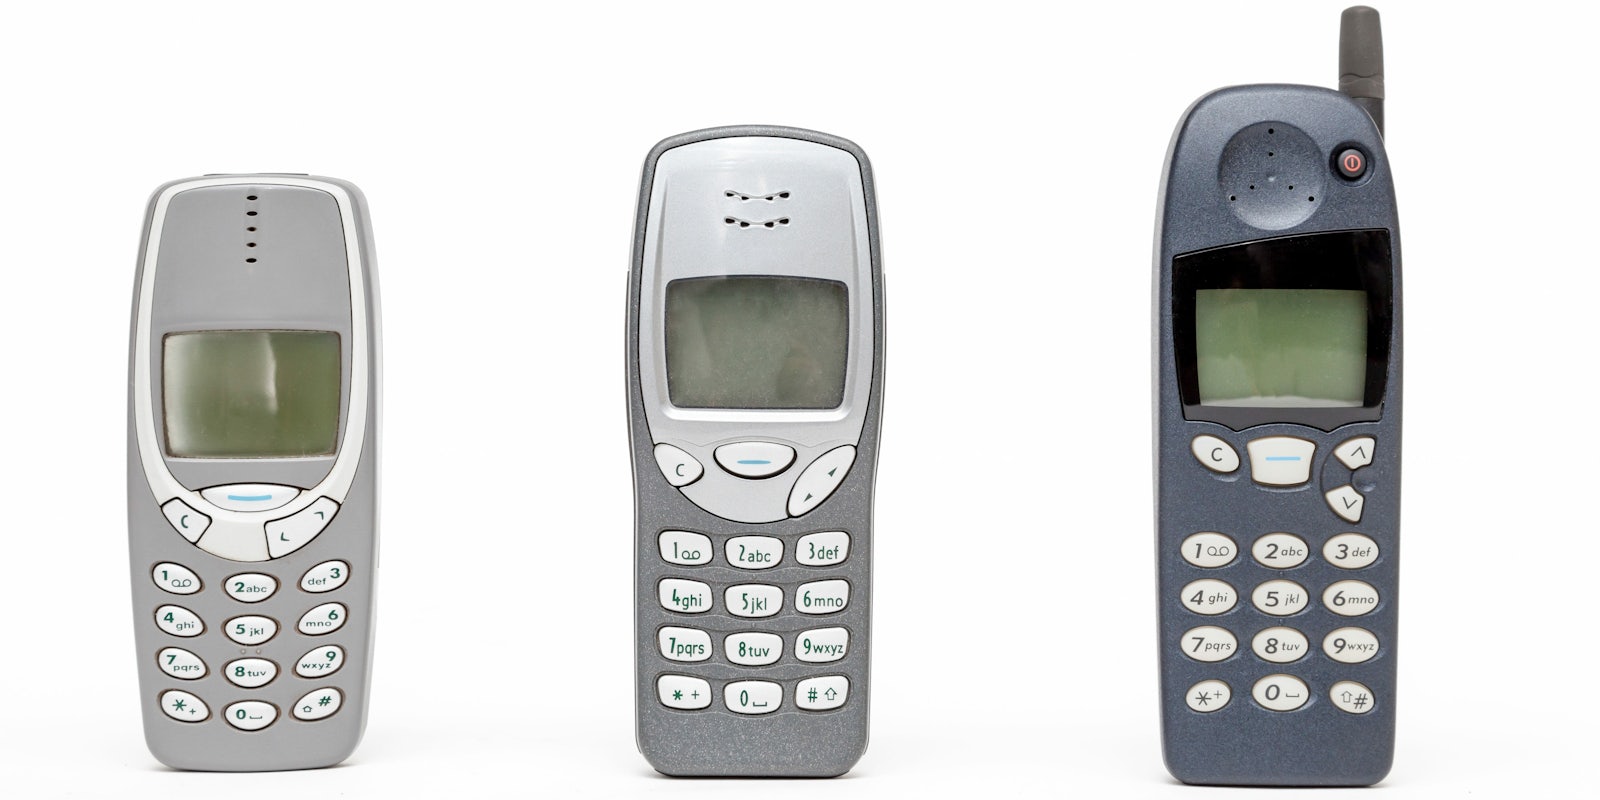 Did you know: The first Nokia Android phone released way back in 2014